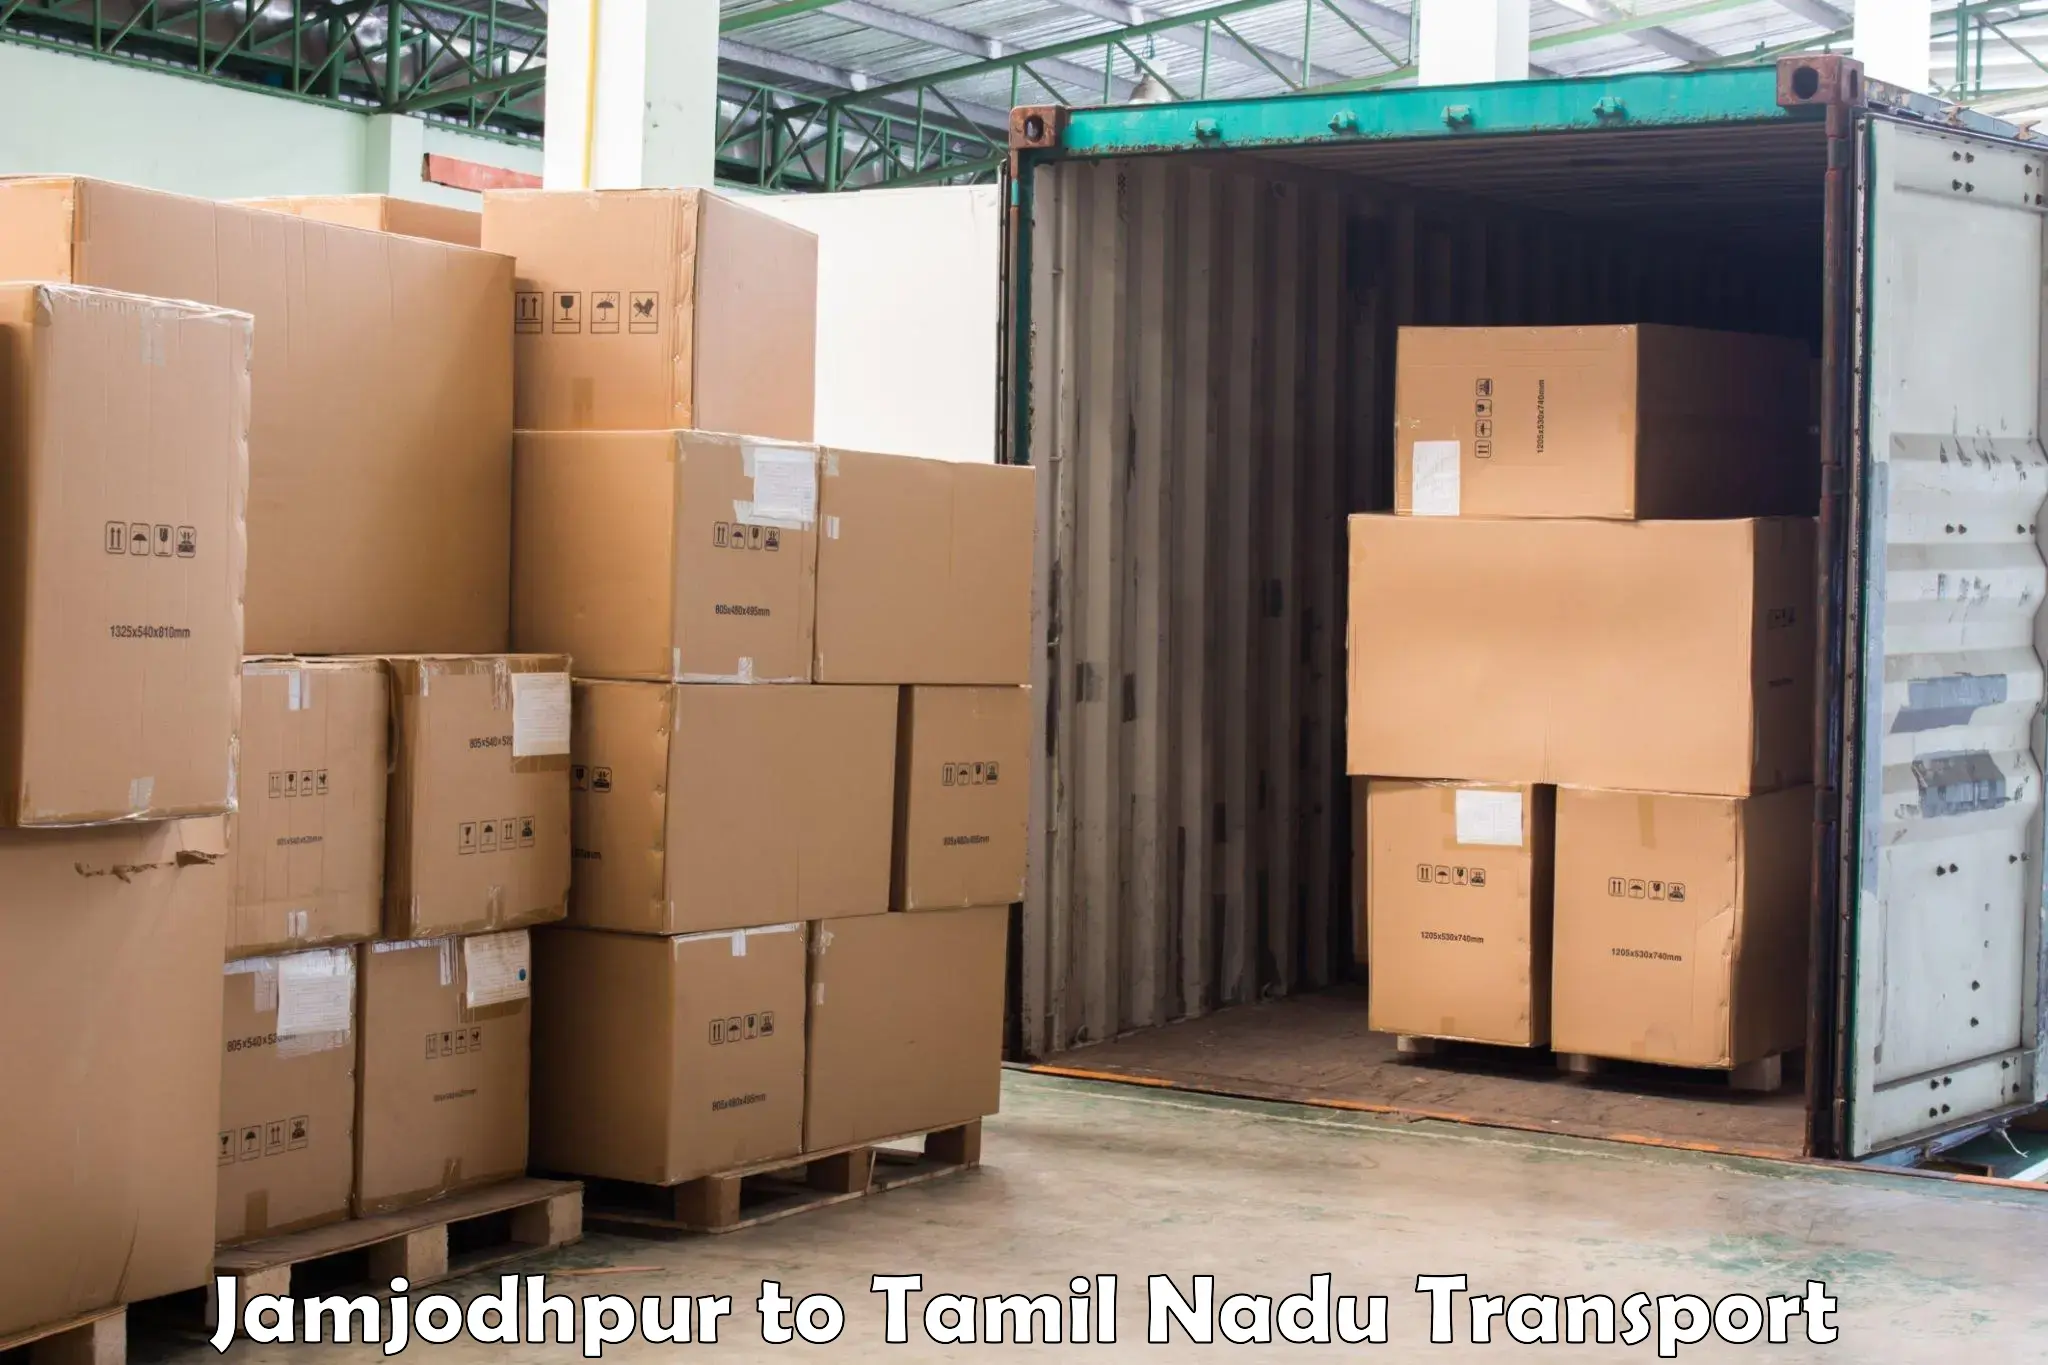 Transport bike from one state to another Jamjodhpur to Tamil Nadu